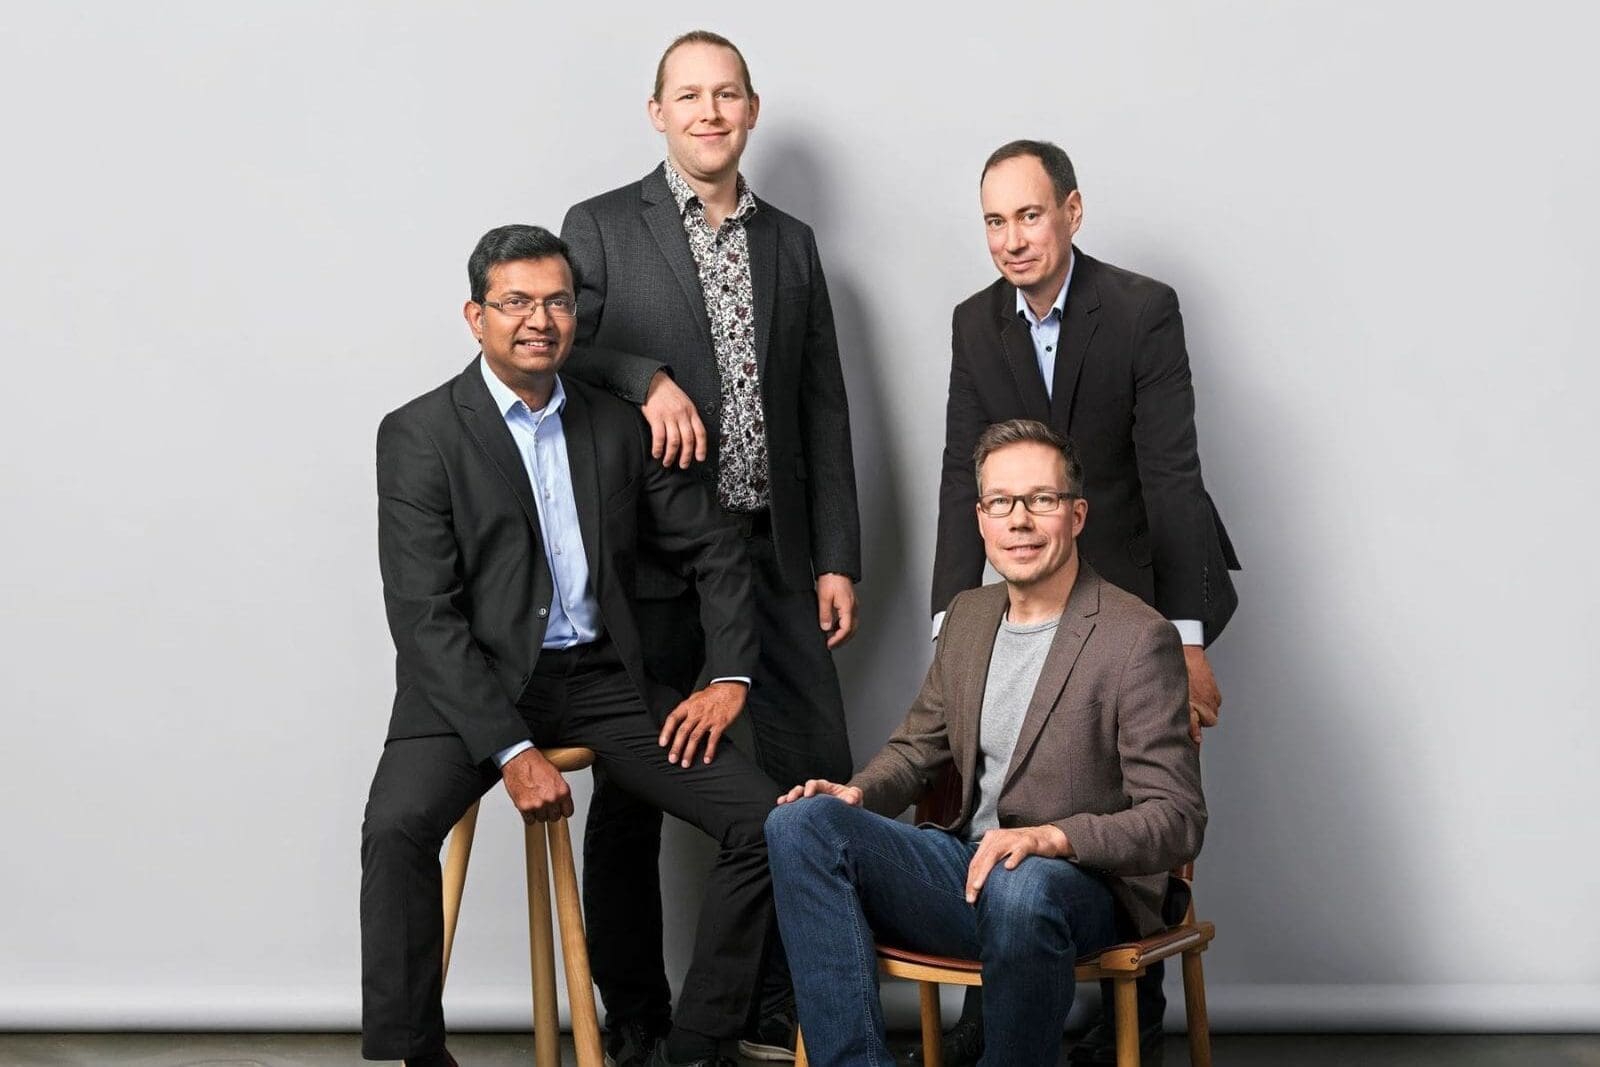 Picture of the SemiQon Team Himadri Majumdar CEO, Mika Prunnila Chief Research Officer, Janne Lehtinen Chief Science Officer, and Markku Kainlauri Lead Fabrication